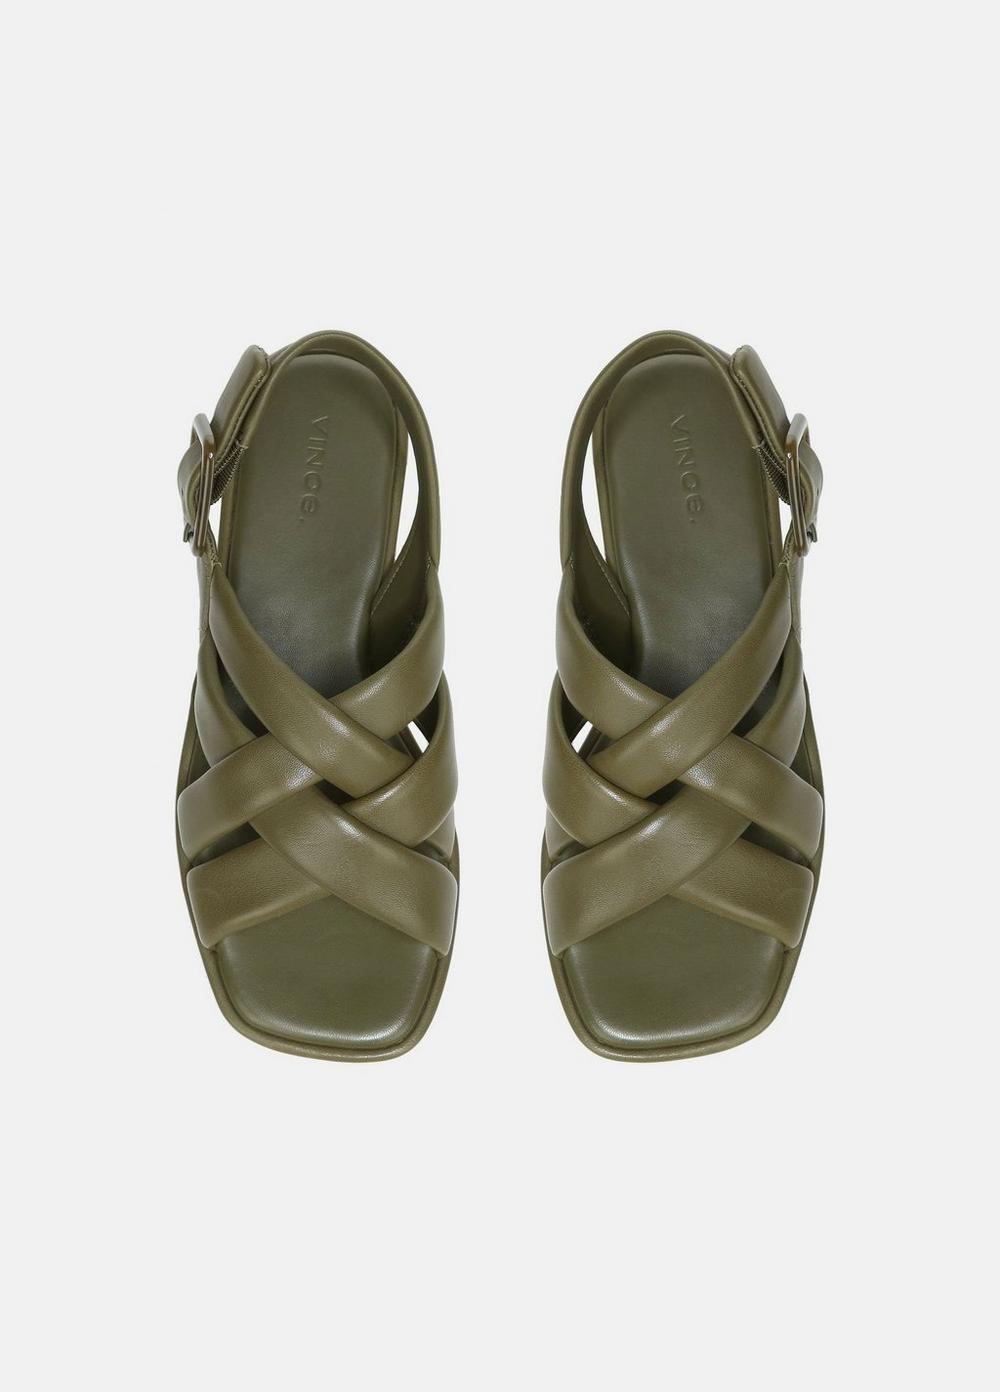 Rexx Leather Sandal for Women | Vince